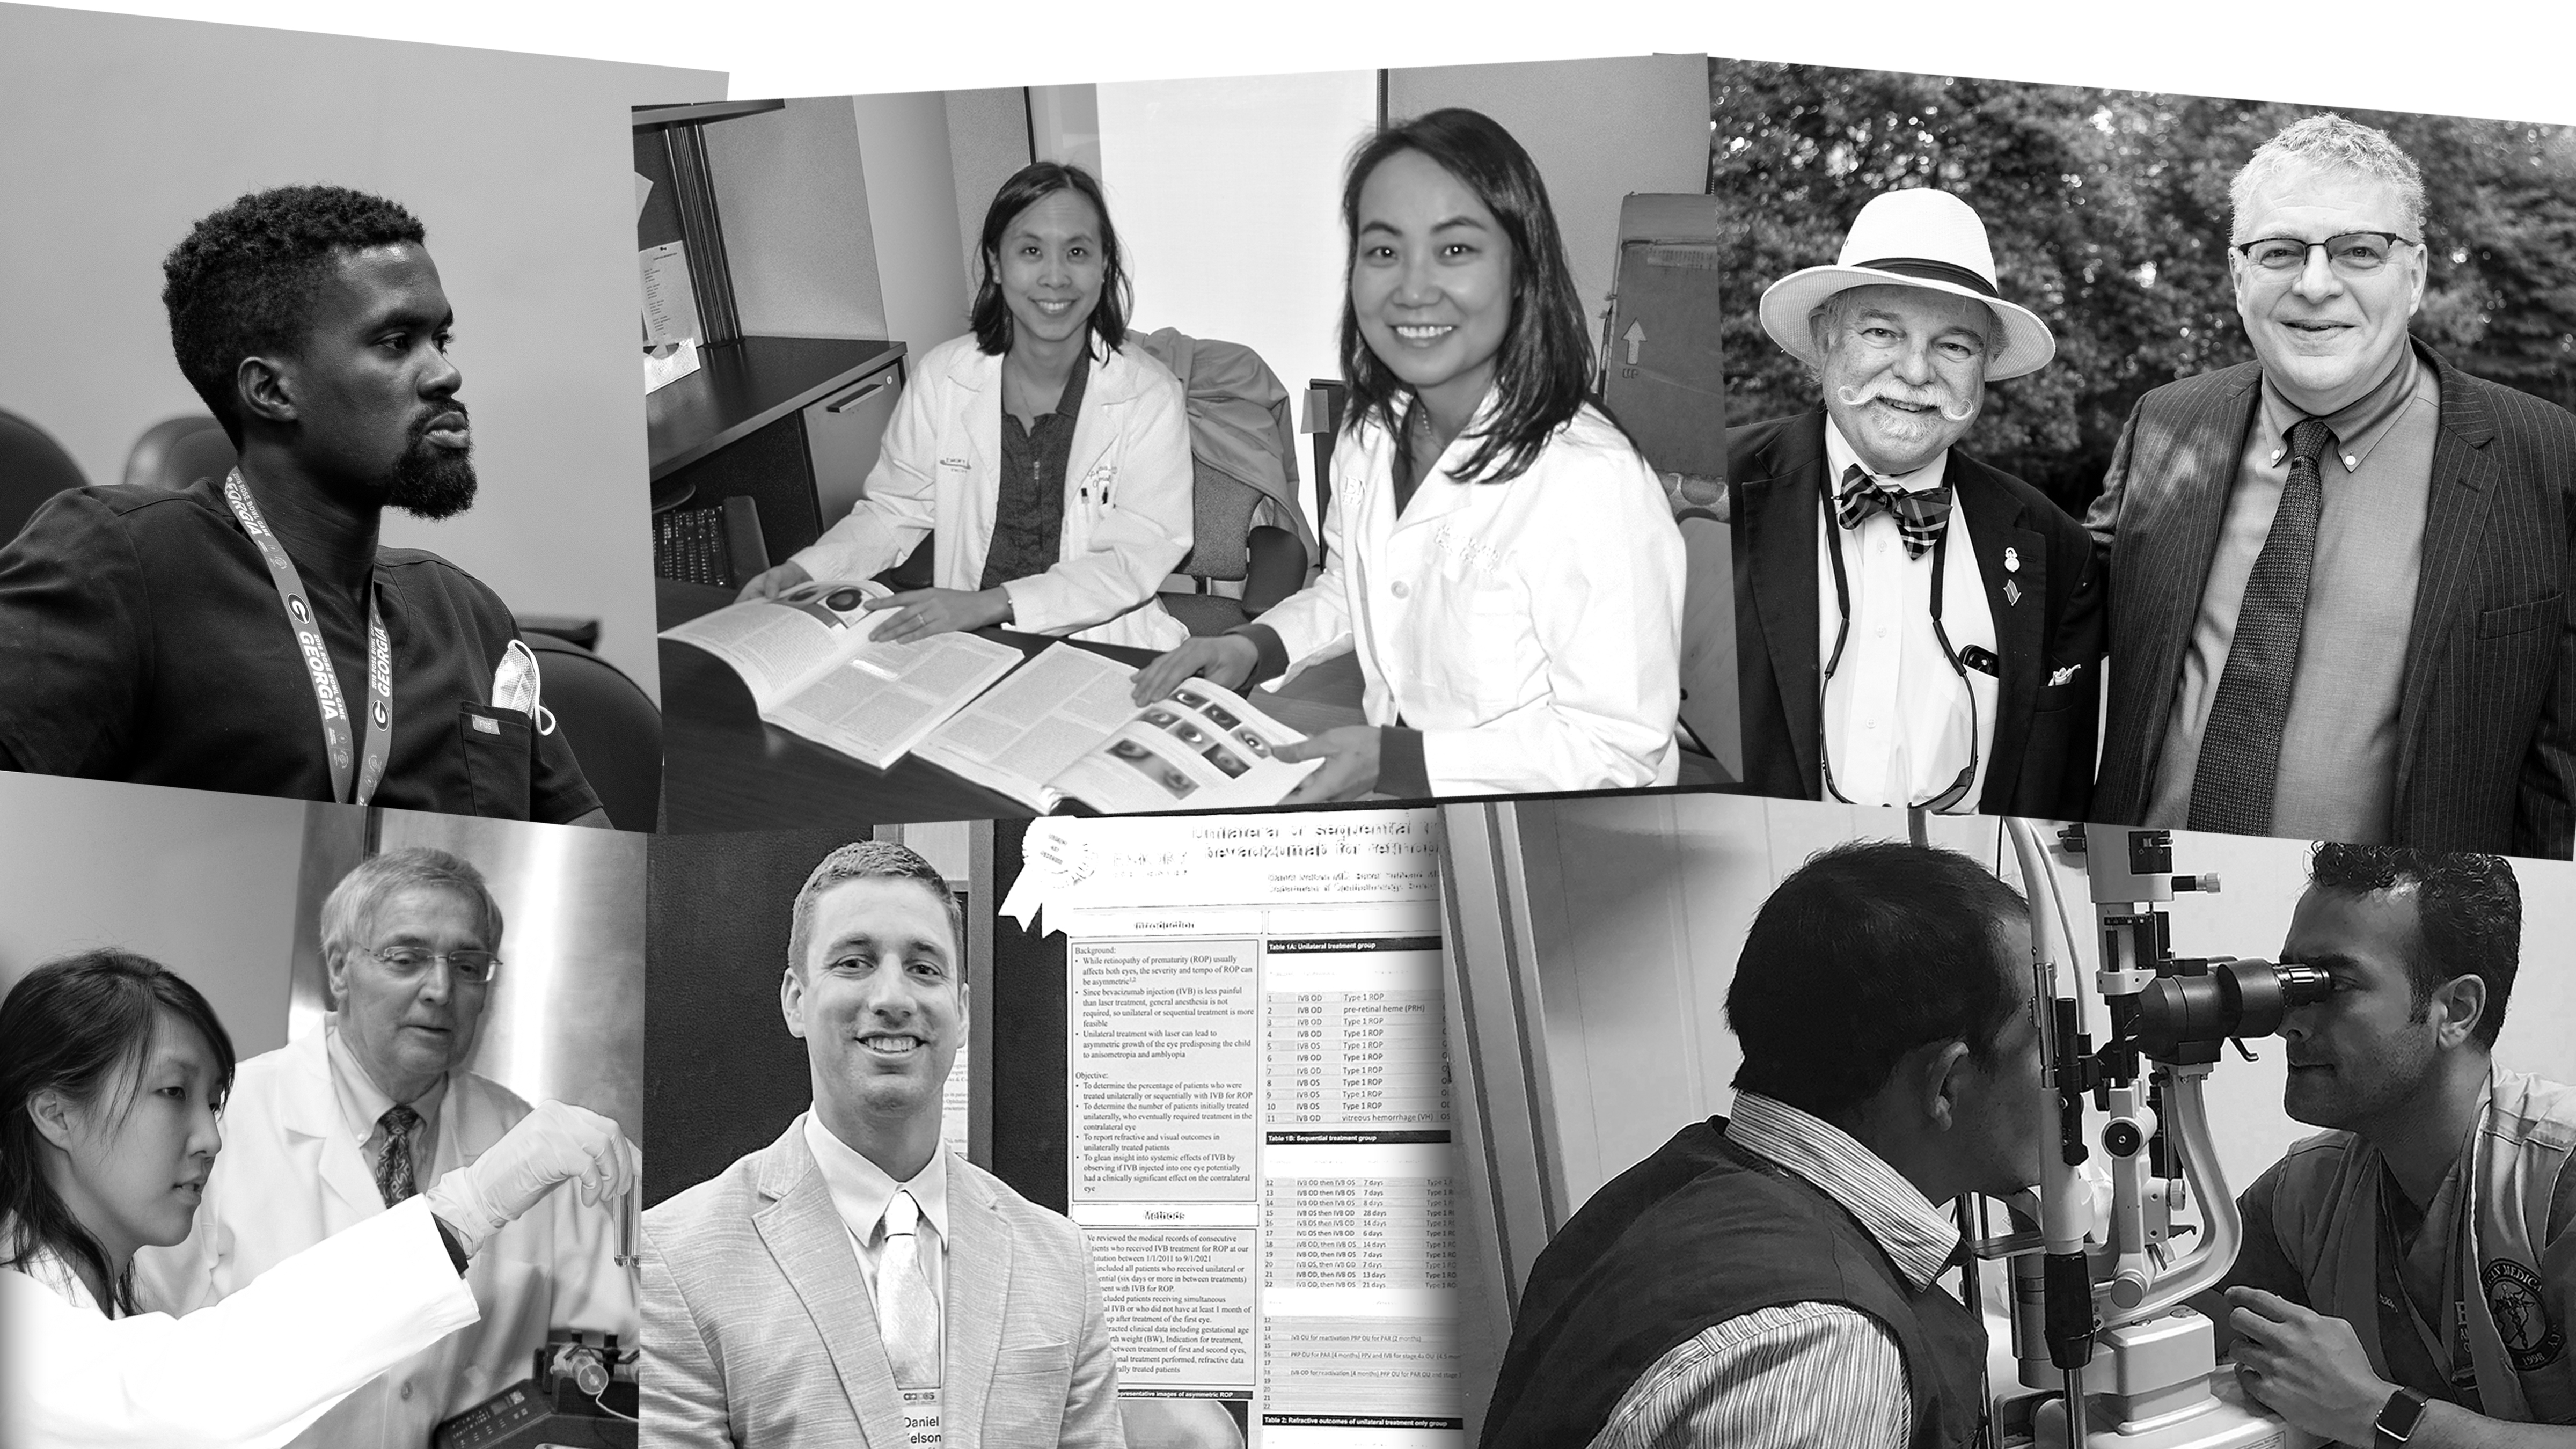 a collage of black and white photos depicting students, patients, physicians,